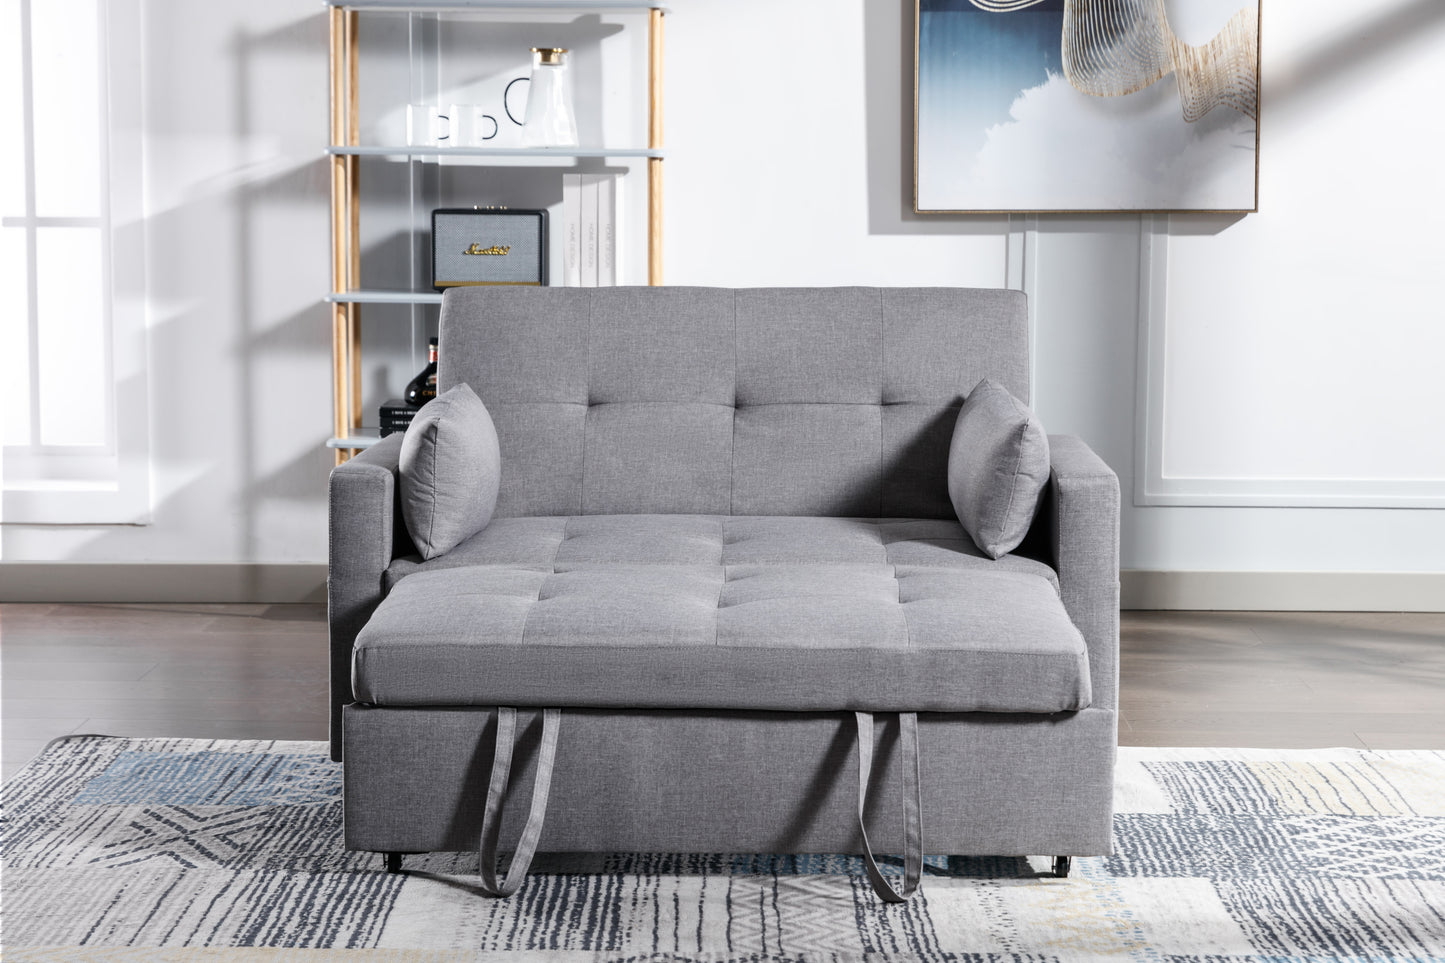 3-in-1 Convertible Sleeper Loveseat with Side Pocket